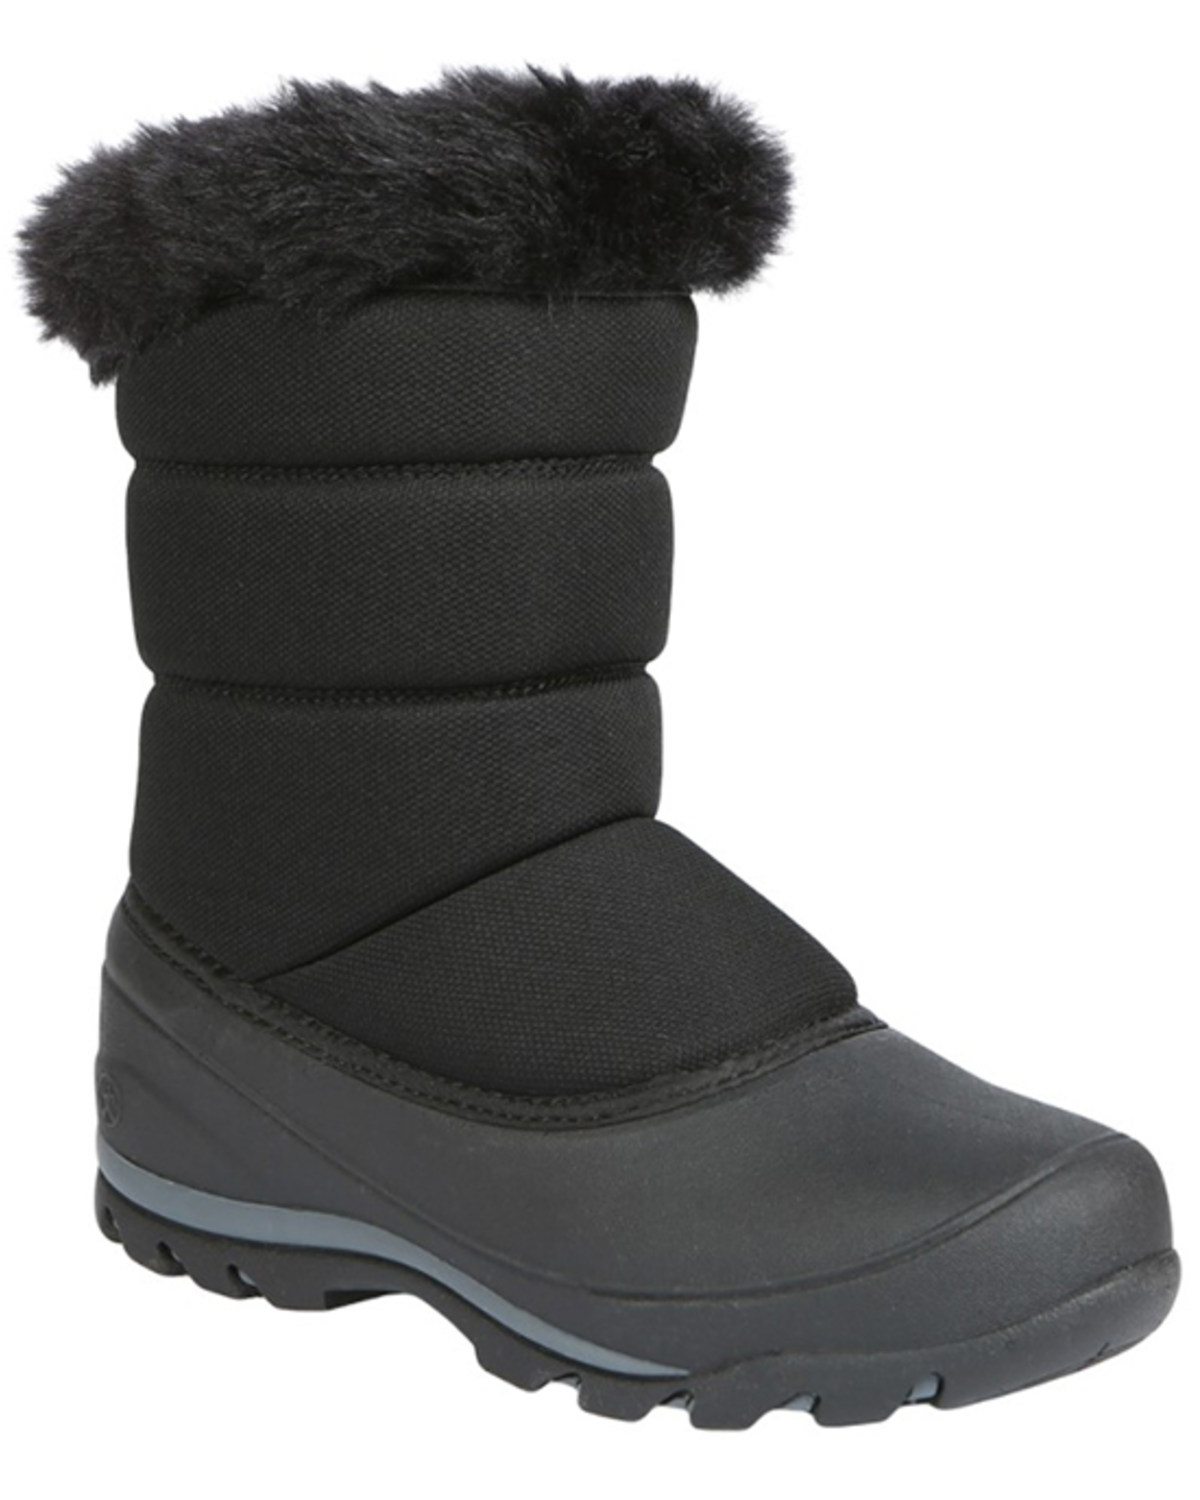 Northside Women's Ava Insulated Winter Snow Work Boots - Round Toe